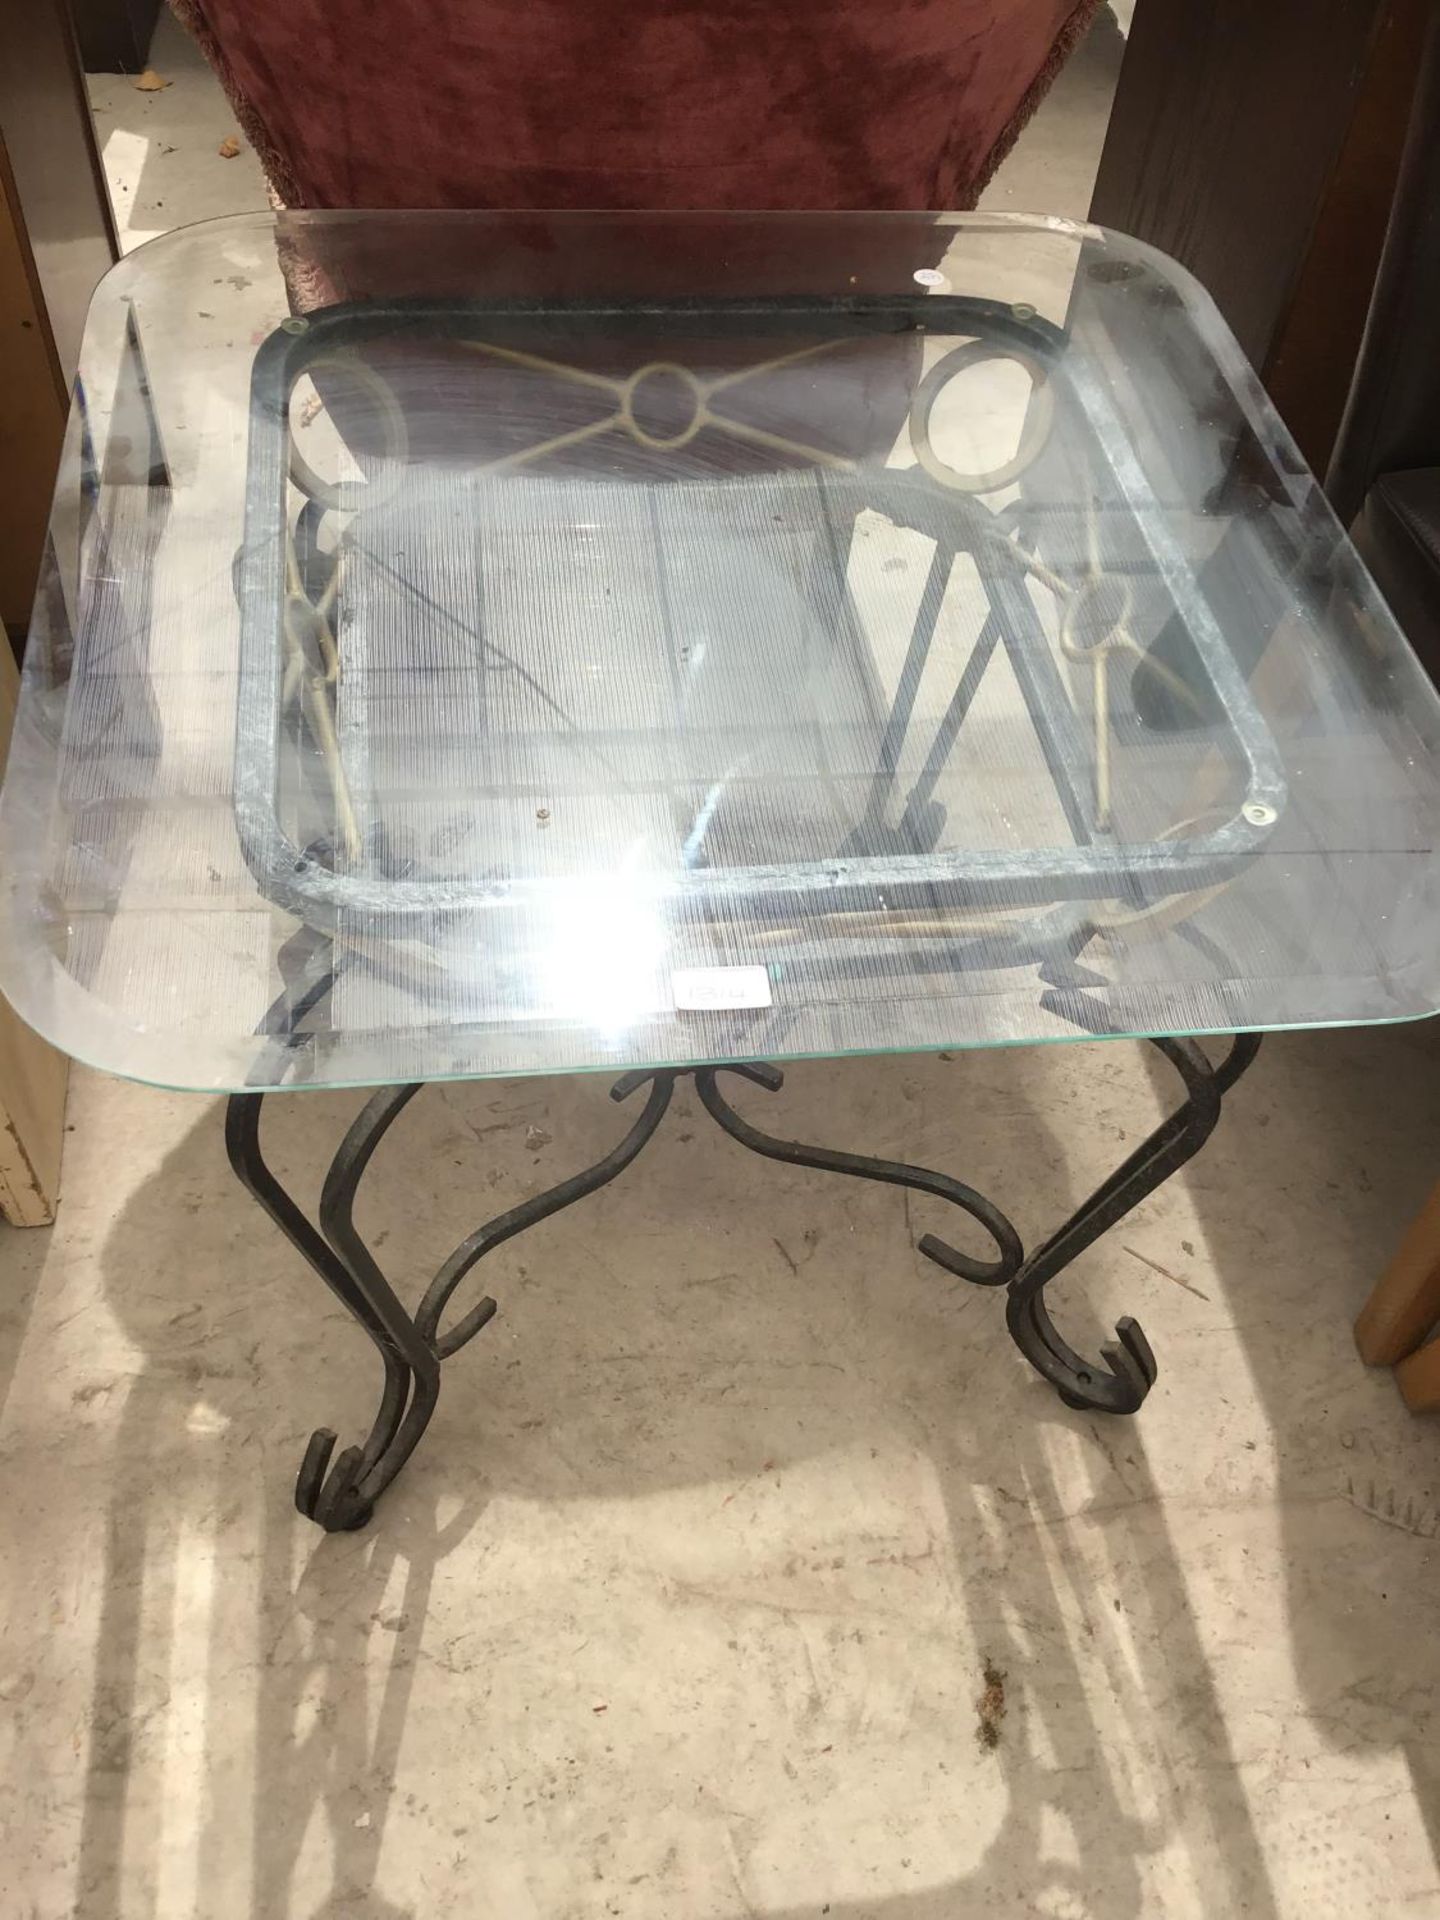 A GLASS TOPPED COFFEE TABLE WITH METAL BASE